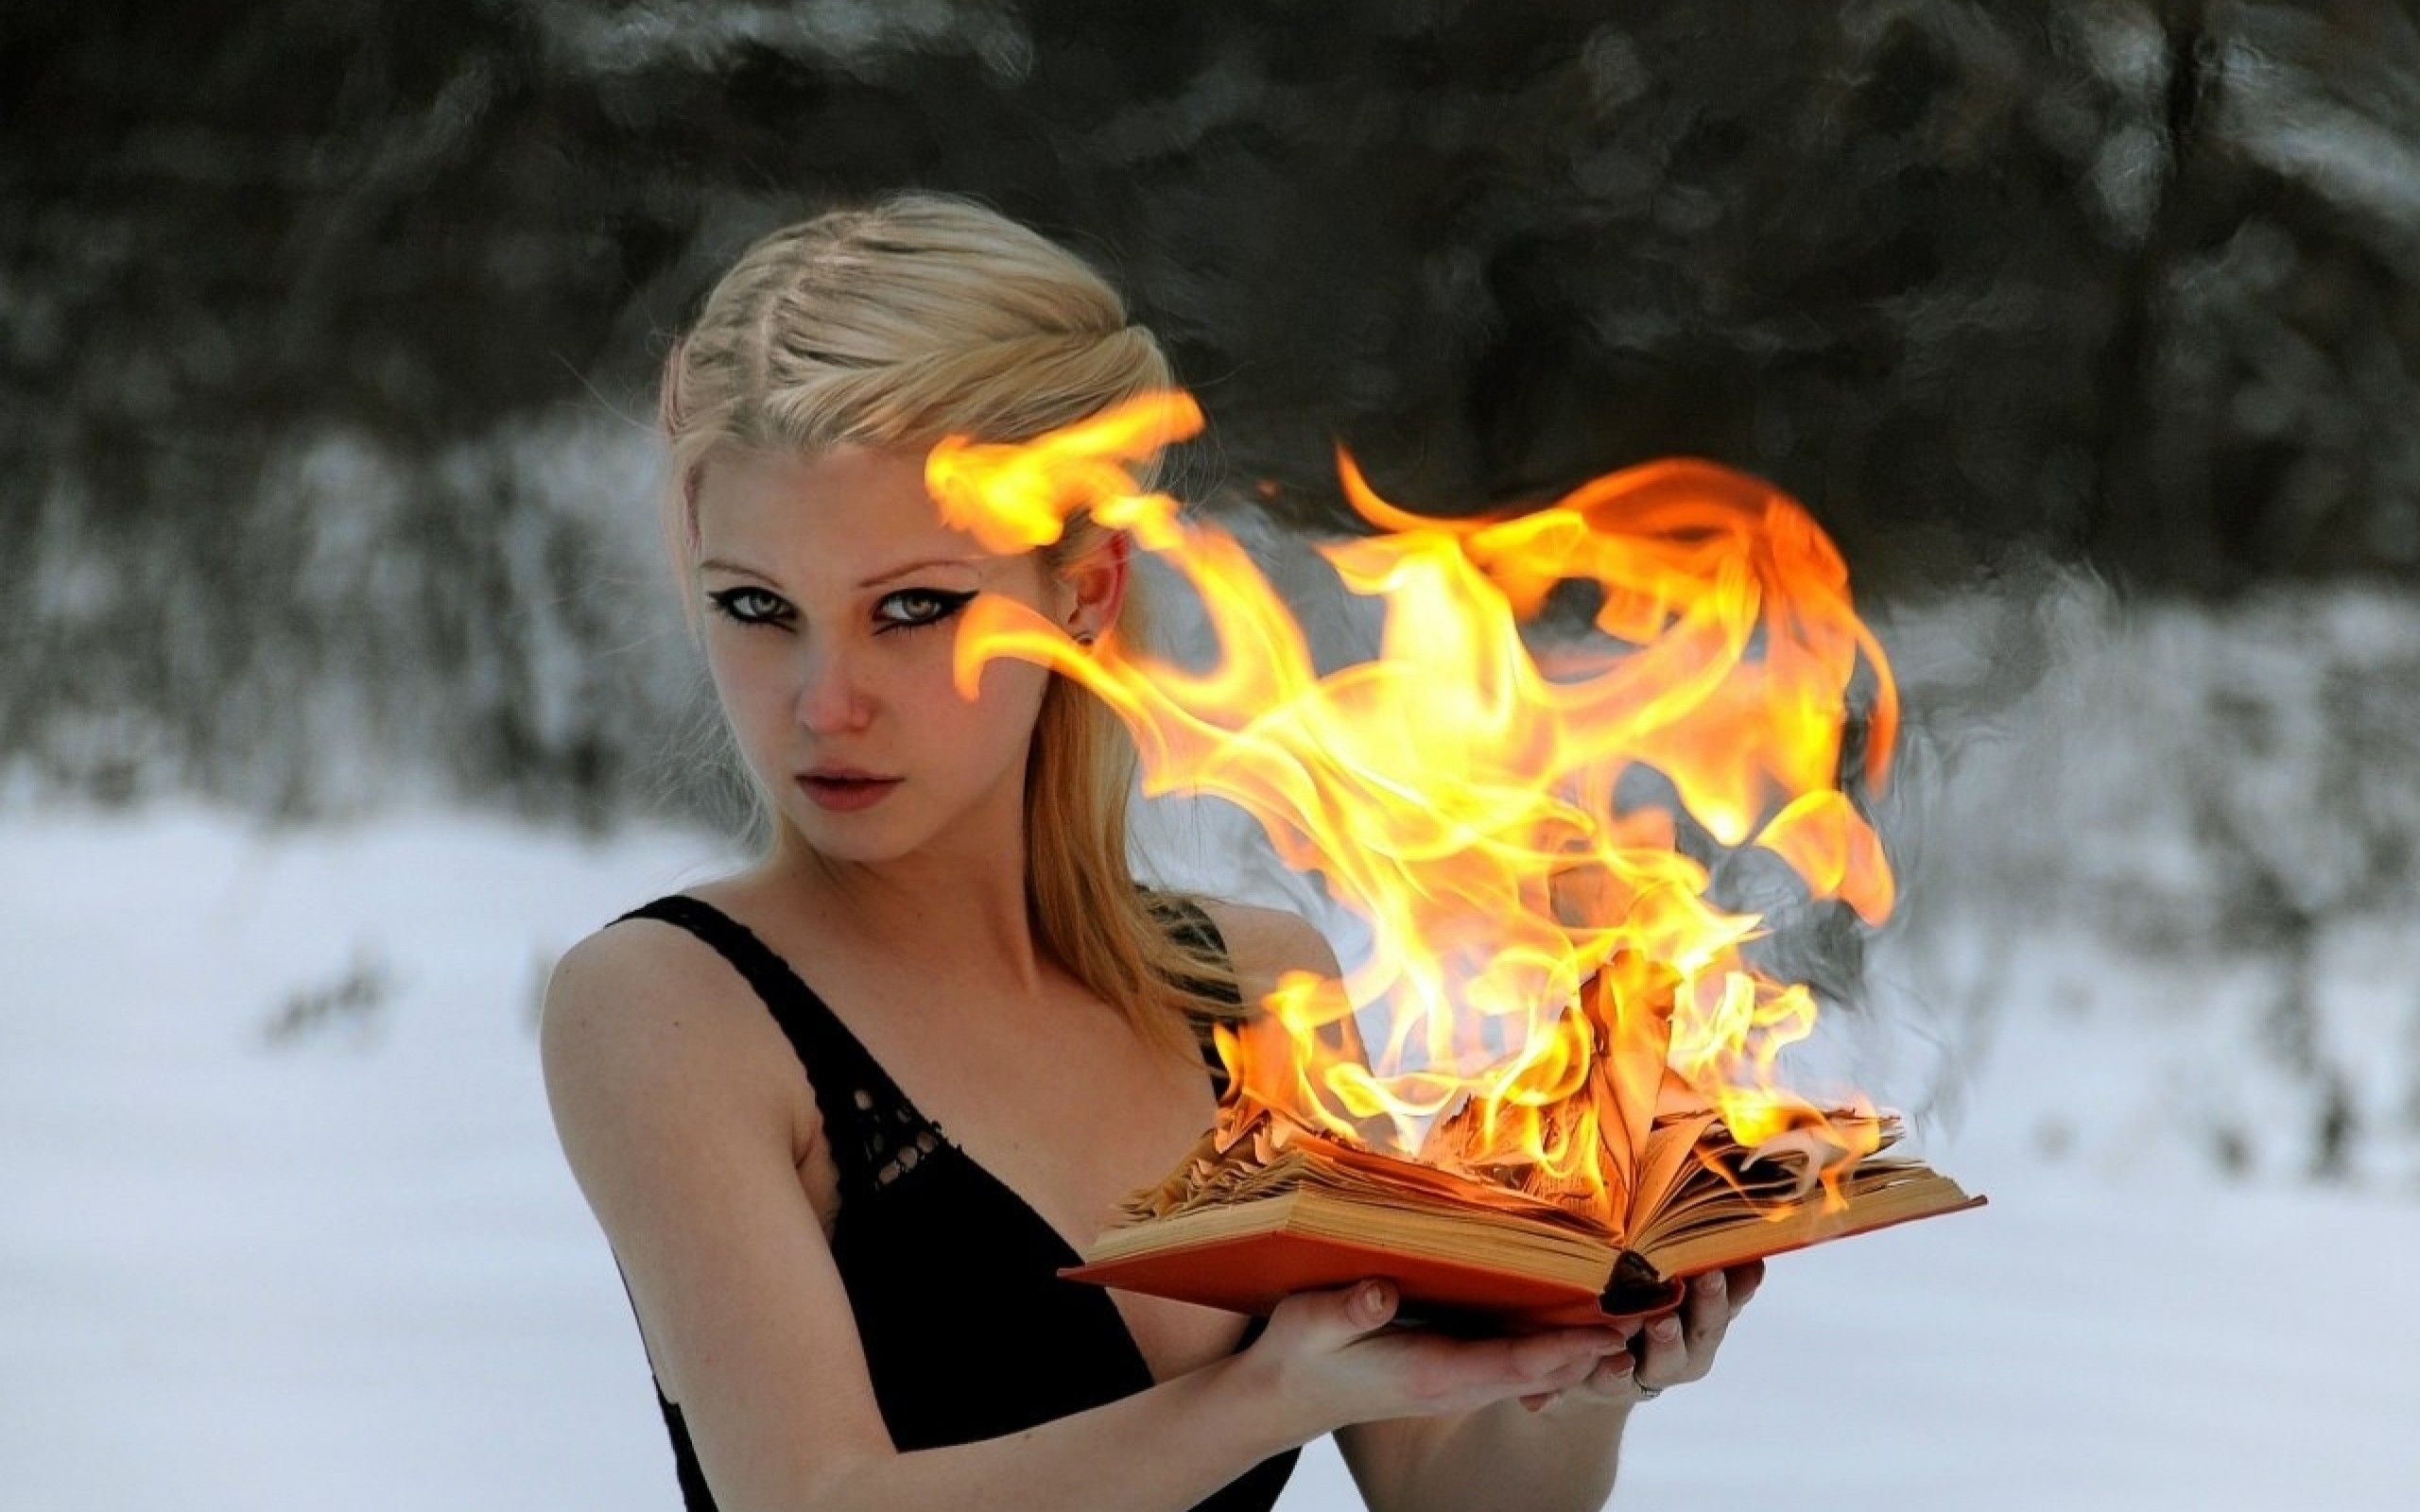 women, fire, photography, models, people, books, burning wallpaper. Fire photography, Girl wallpaper, Gothic image